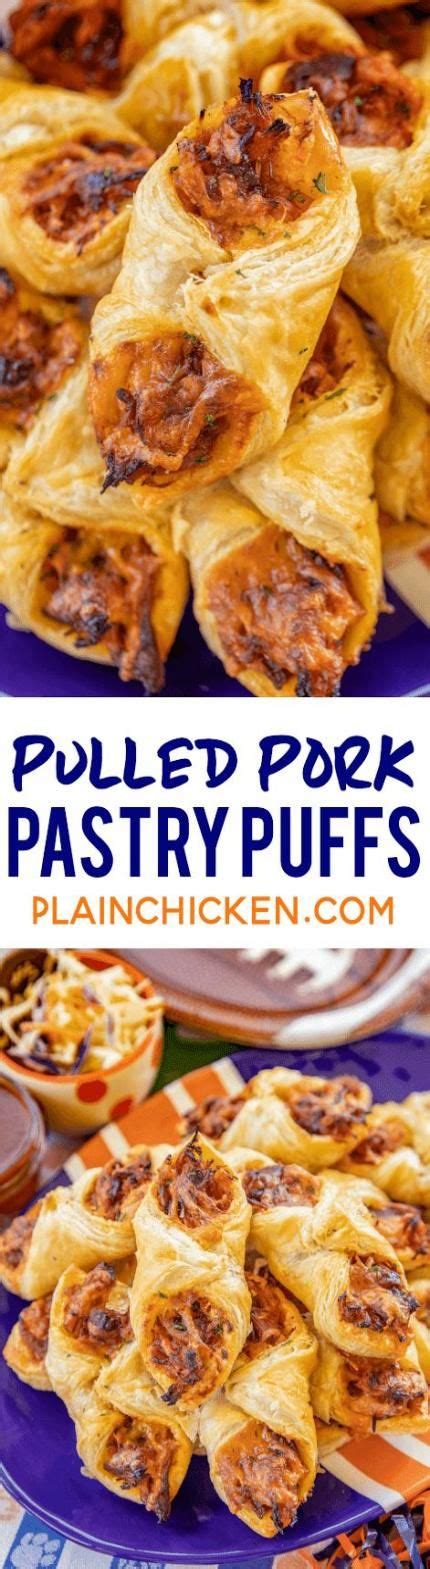 This recipe for homemade chinese bbq pork pastry (char siu sou) features roasted bbq pork encapsulated in a light and flaky puff pastry pulled pork pastry puffs recipe